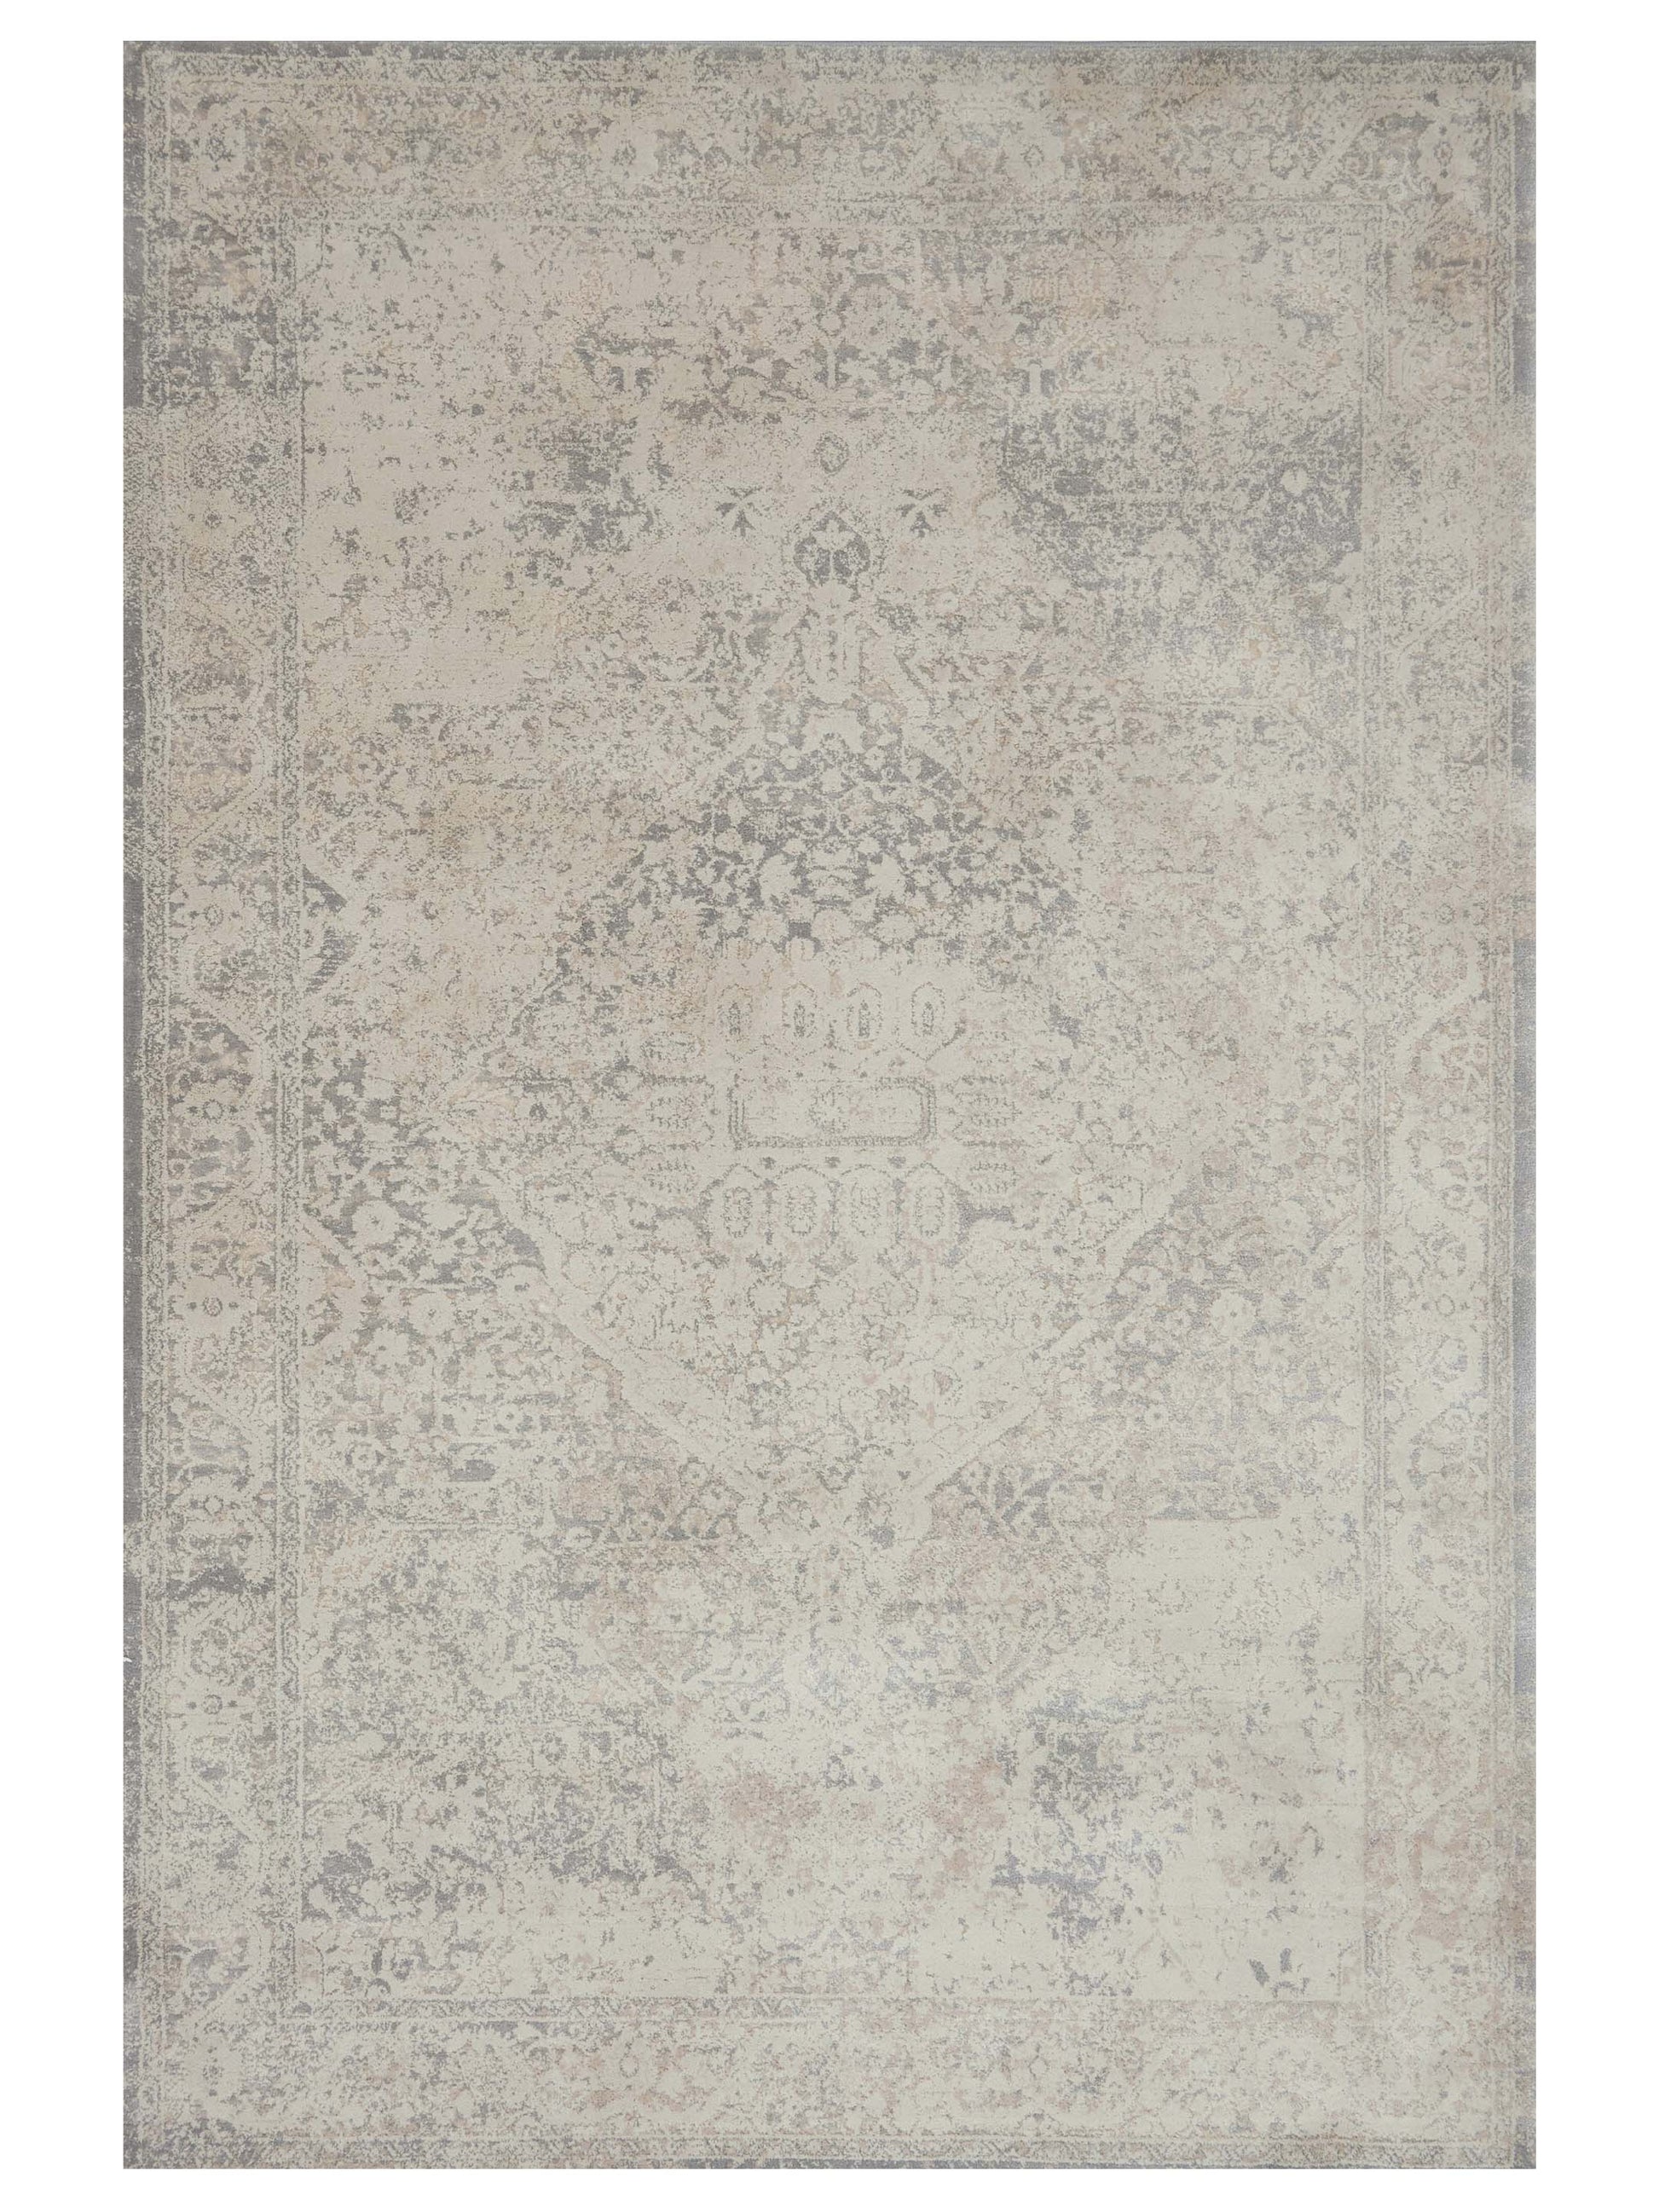 Magnolia Home Everly VY-03 MH Ivory Traditional Machinemade Rug